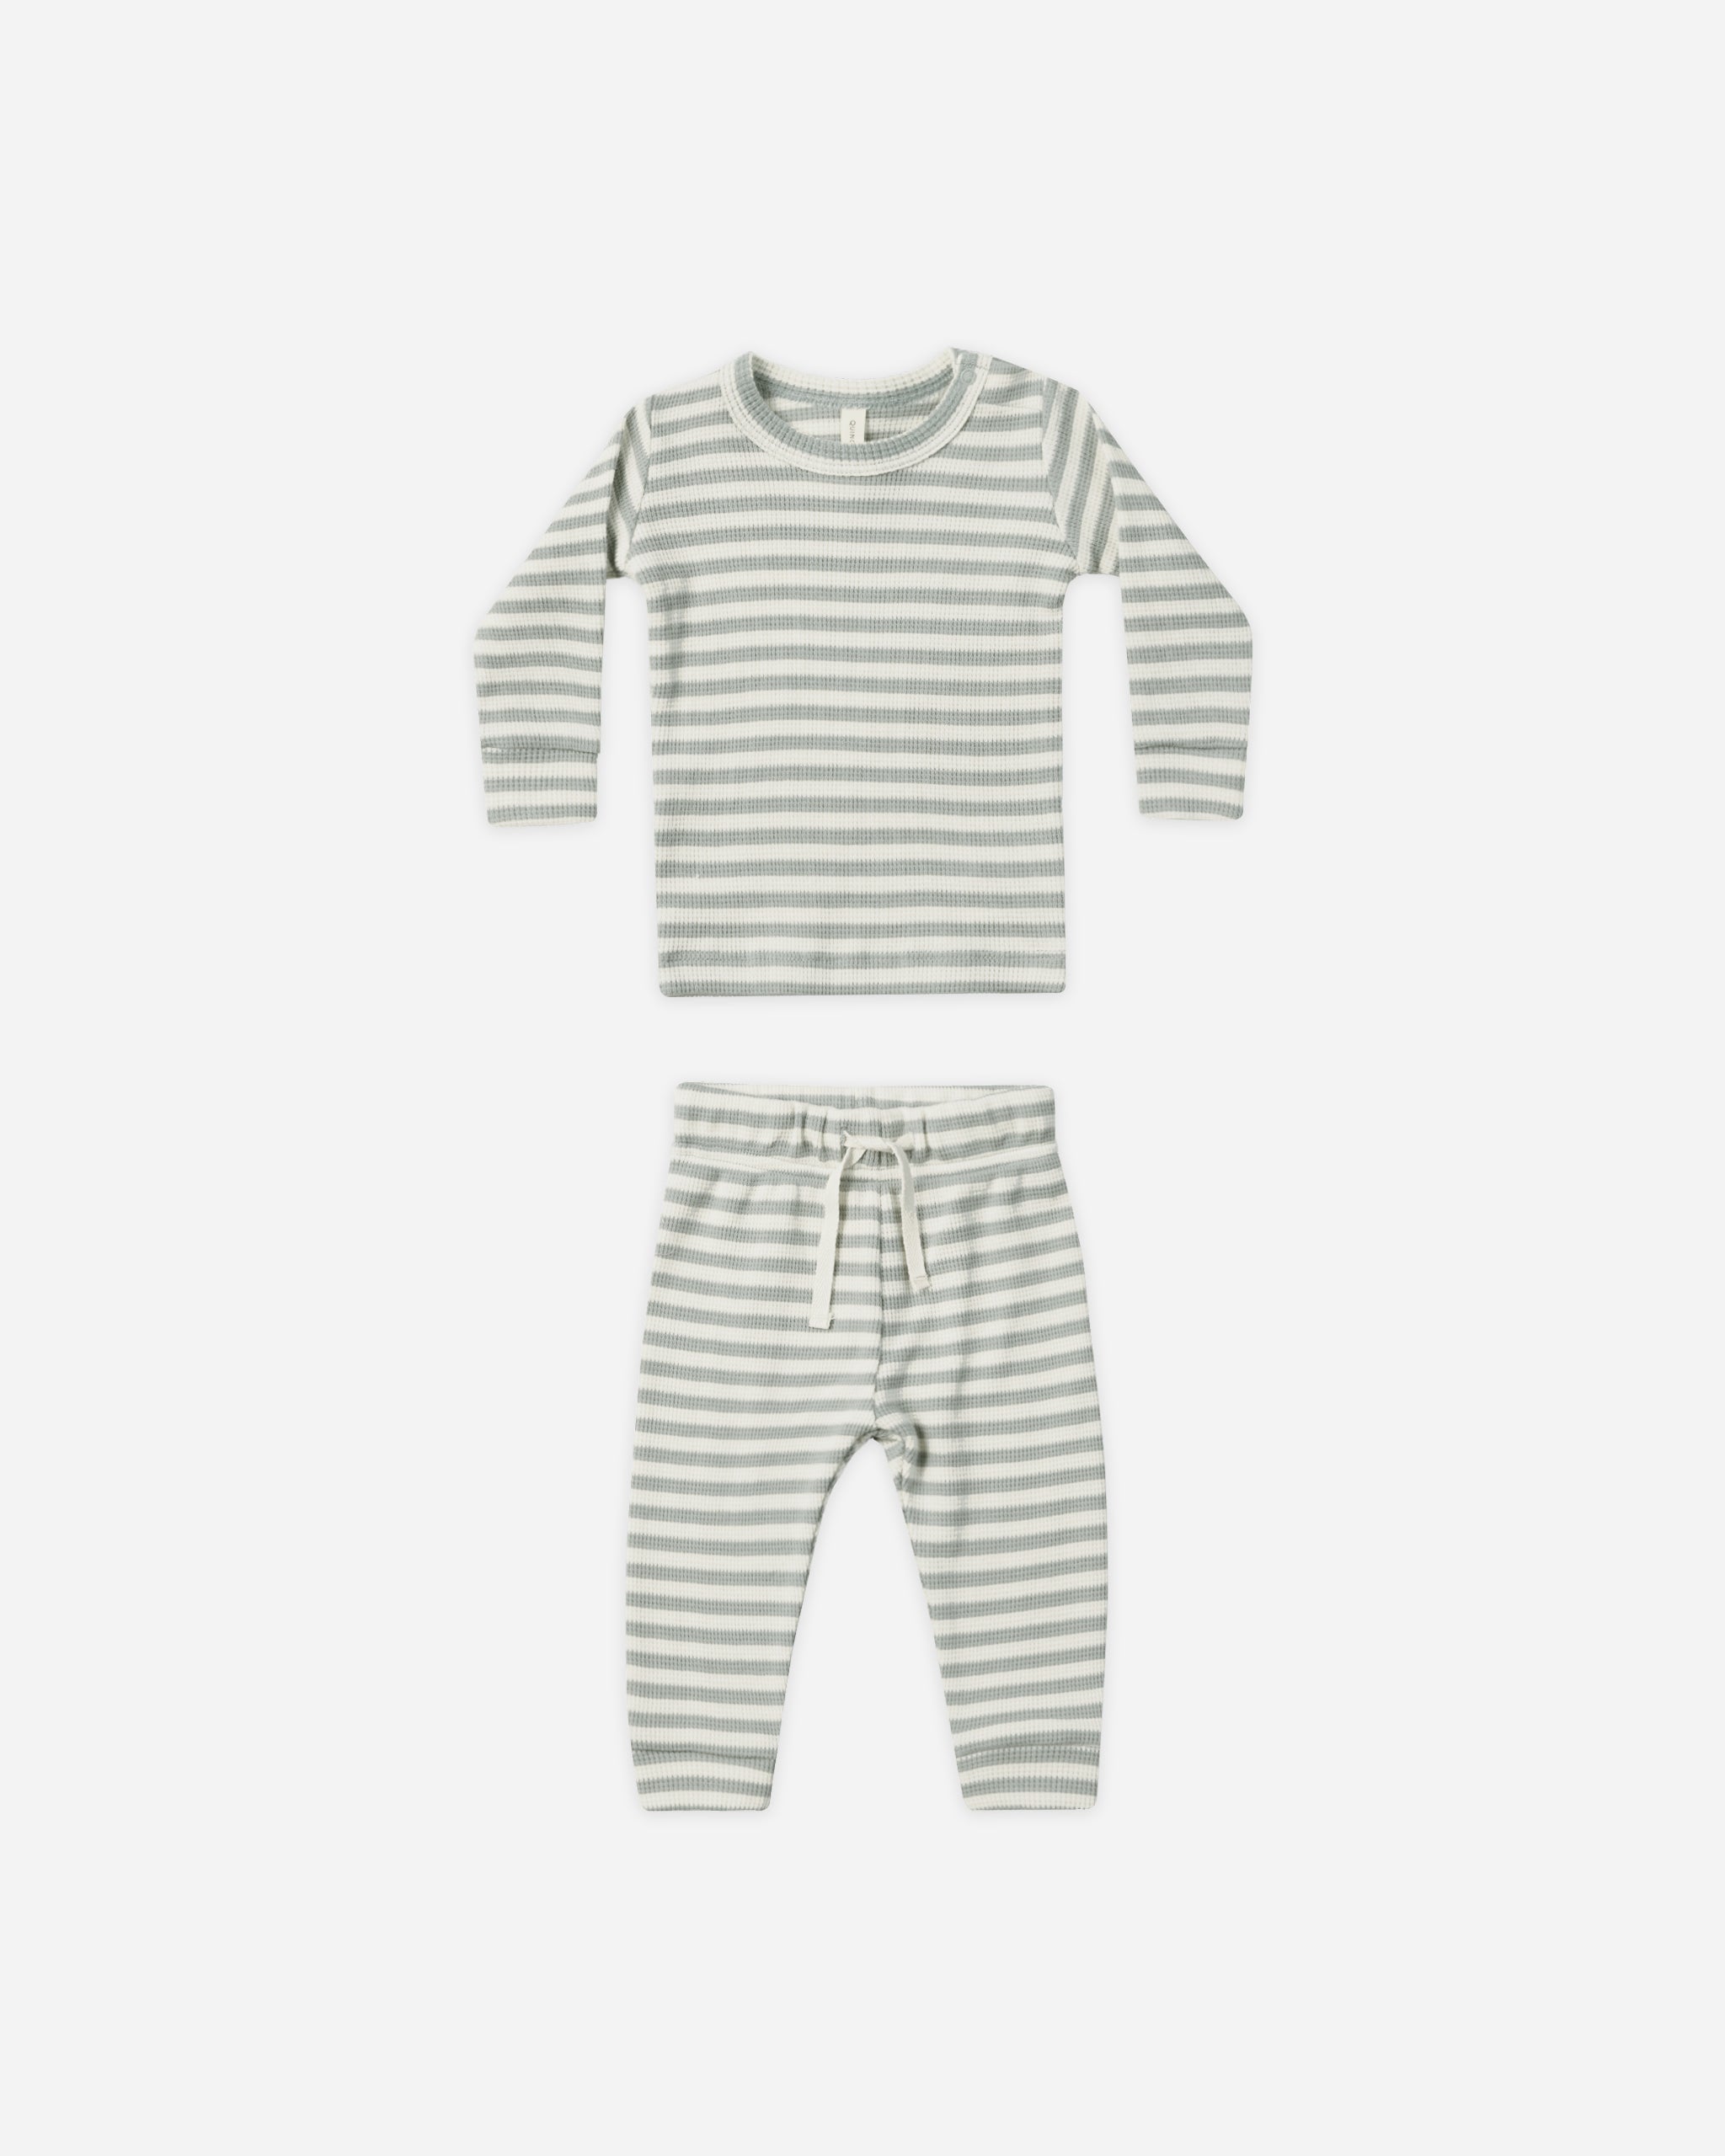 Waffle Top + Pant Set || Sky Stripe - Rylee + Cru | Kids Clothes | Trendy Baby Clothes | Modern Infant Outfits |